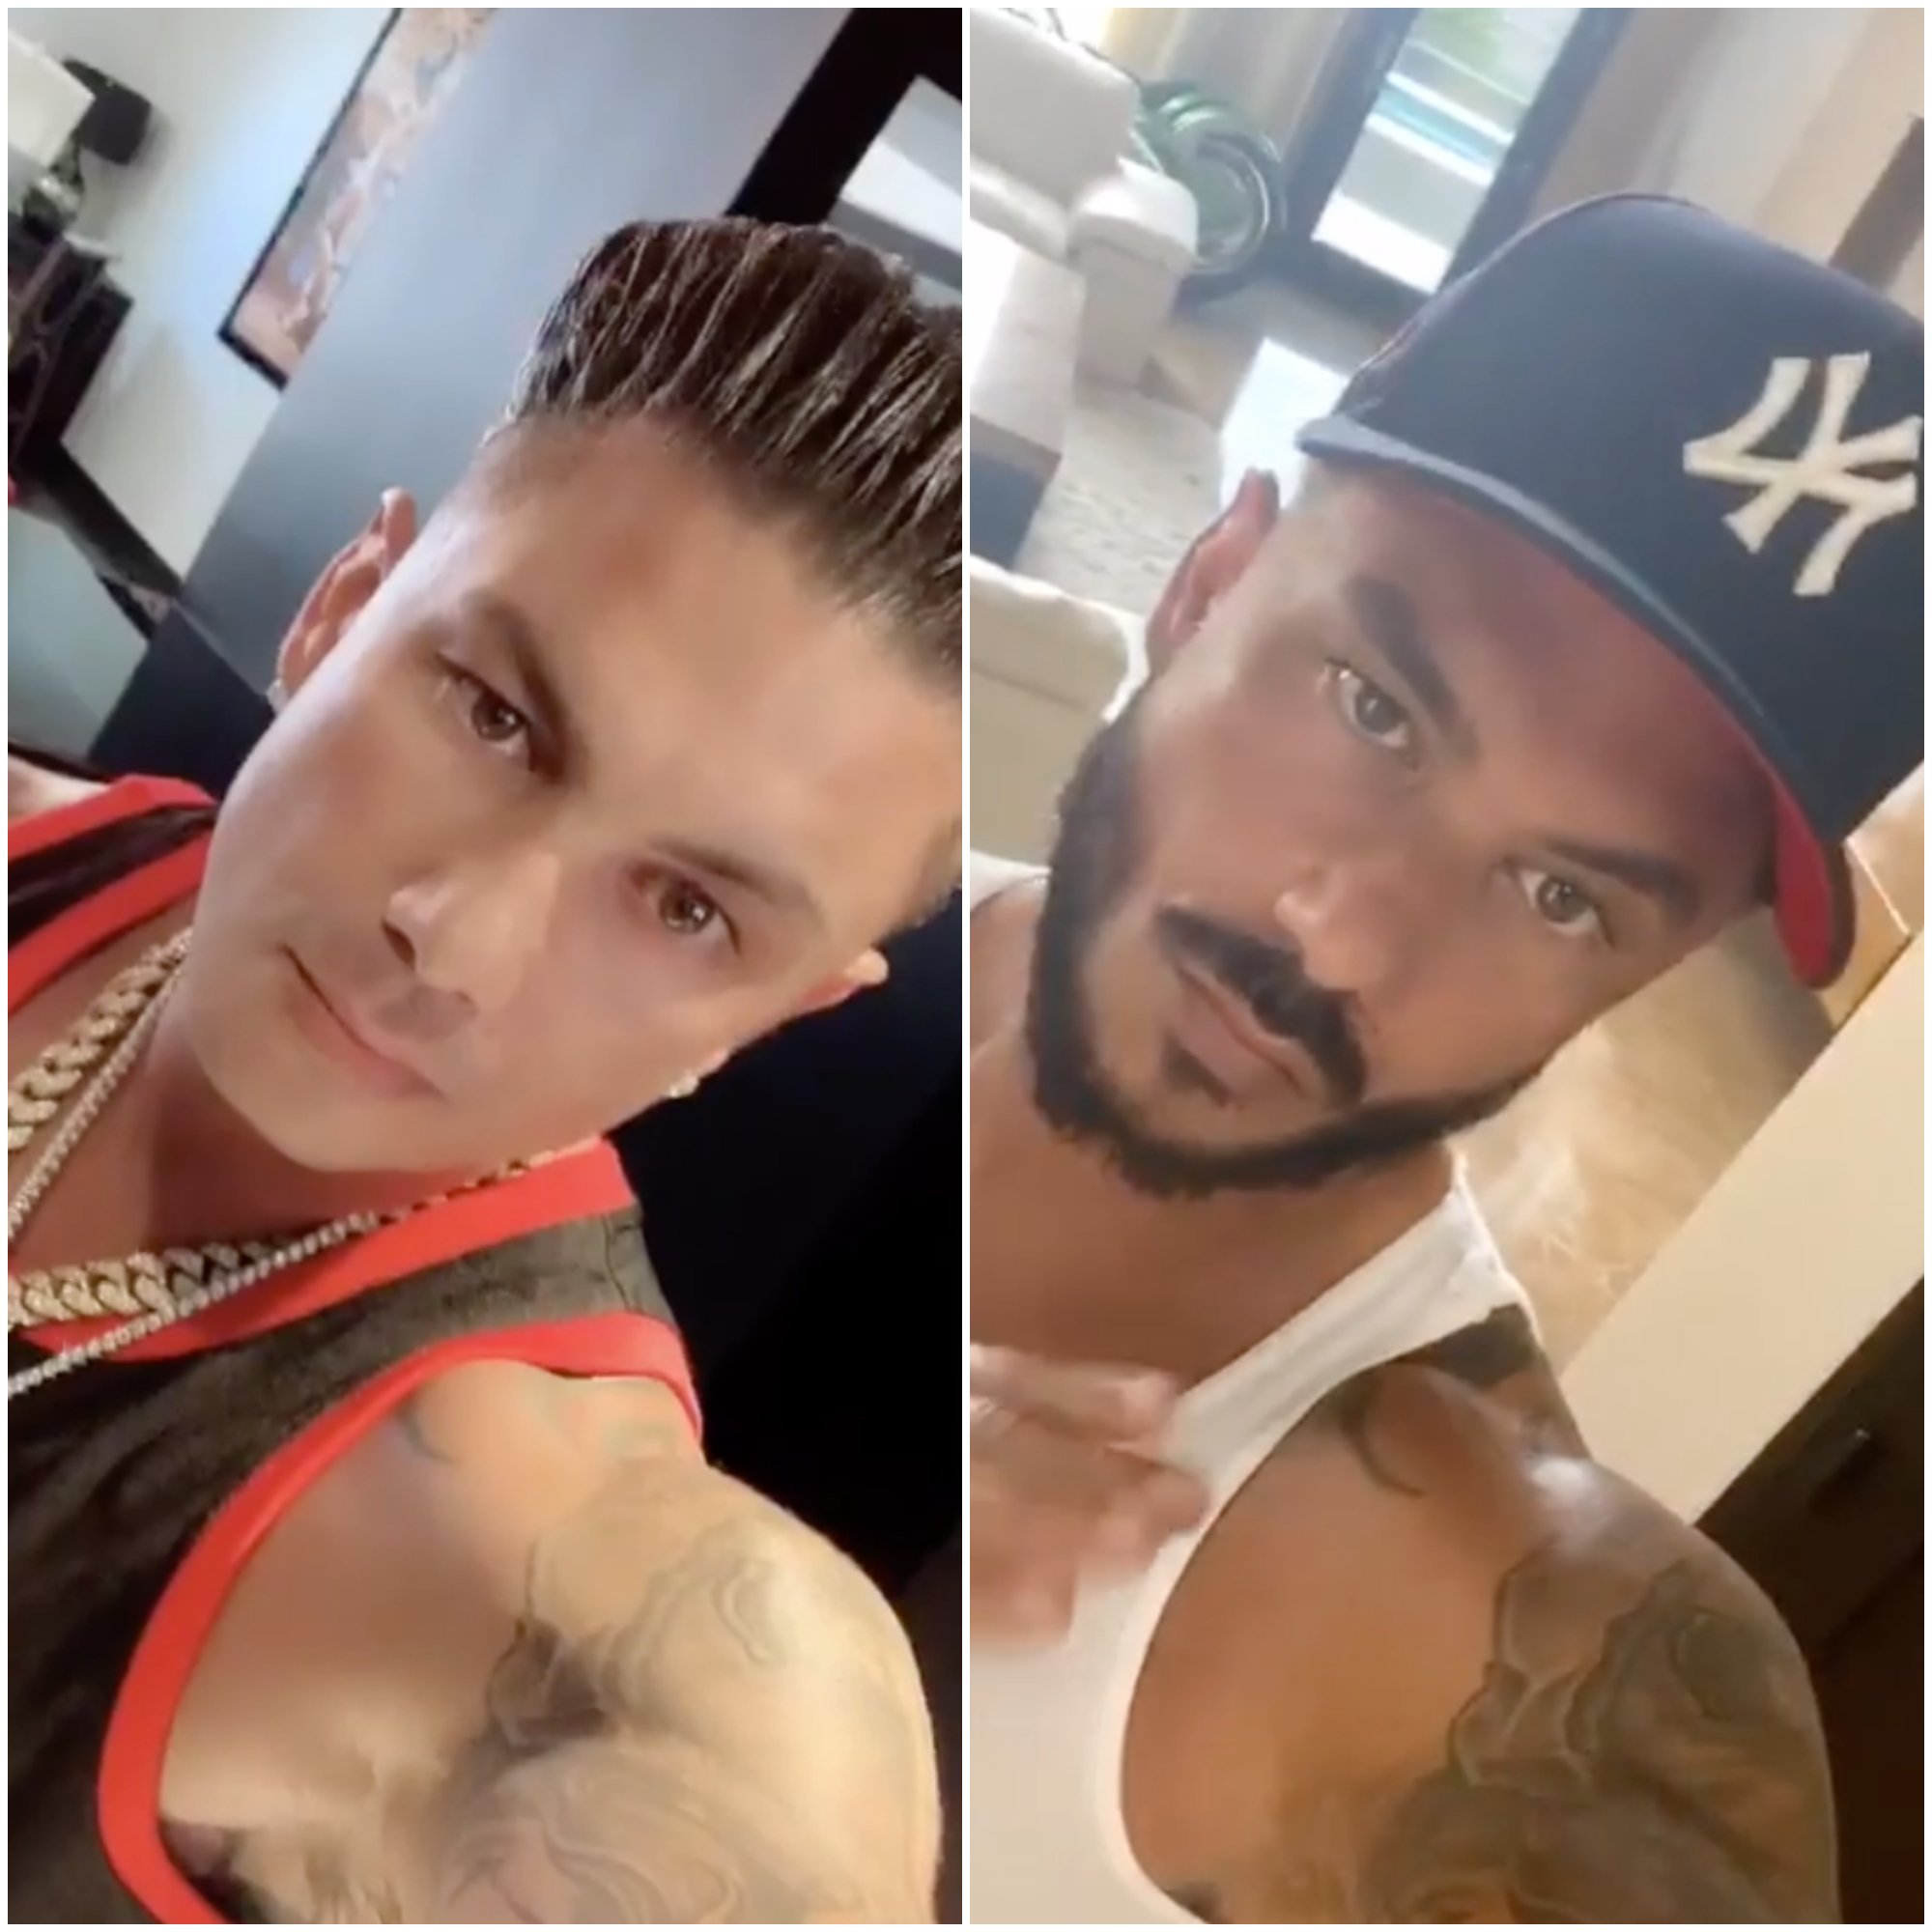 Gym tan love Jersey Shore stars Pauly D and Vinny take their bromance  on the prowl for new MTV dating show  njcom